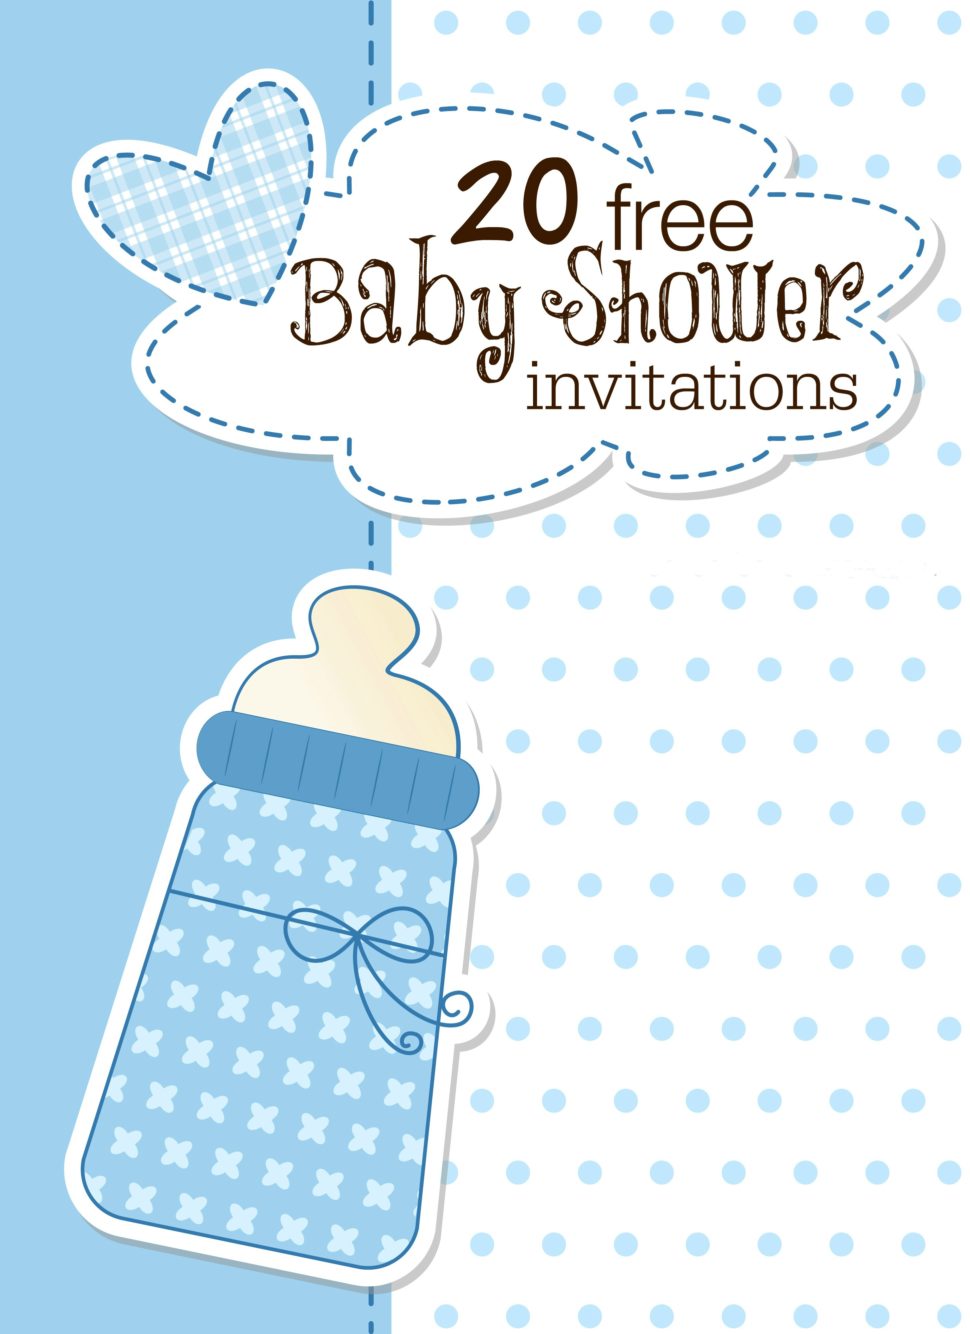 Medium Size of Baby Shower:unique Baby Shower Themes Homemade Baby Shower Decorations Baby Shower Invitations Baby Girl Themes Nautical Baby Shower Invitations For Boys Baby Girl Themes For Bedroom Baby Shower Ideas Baby Shower Decorations Themes For Baby Girl Nursery